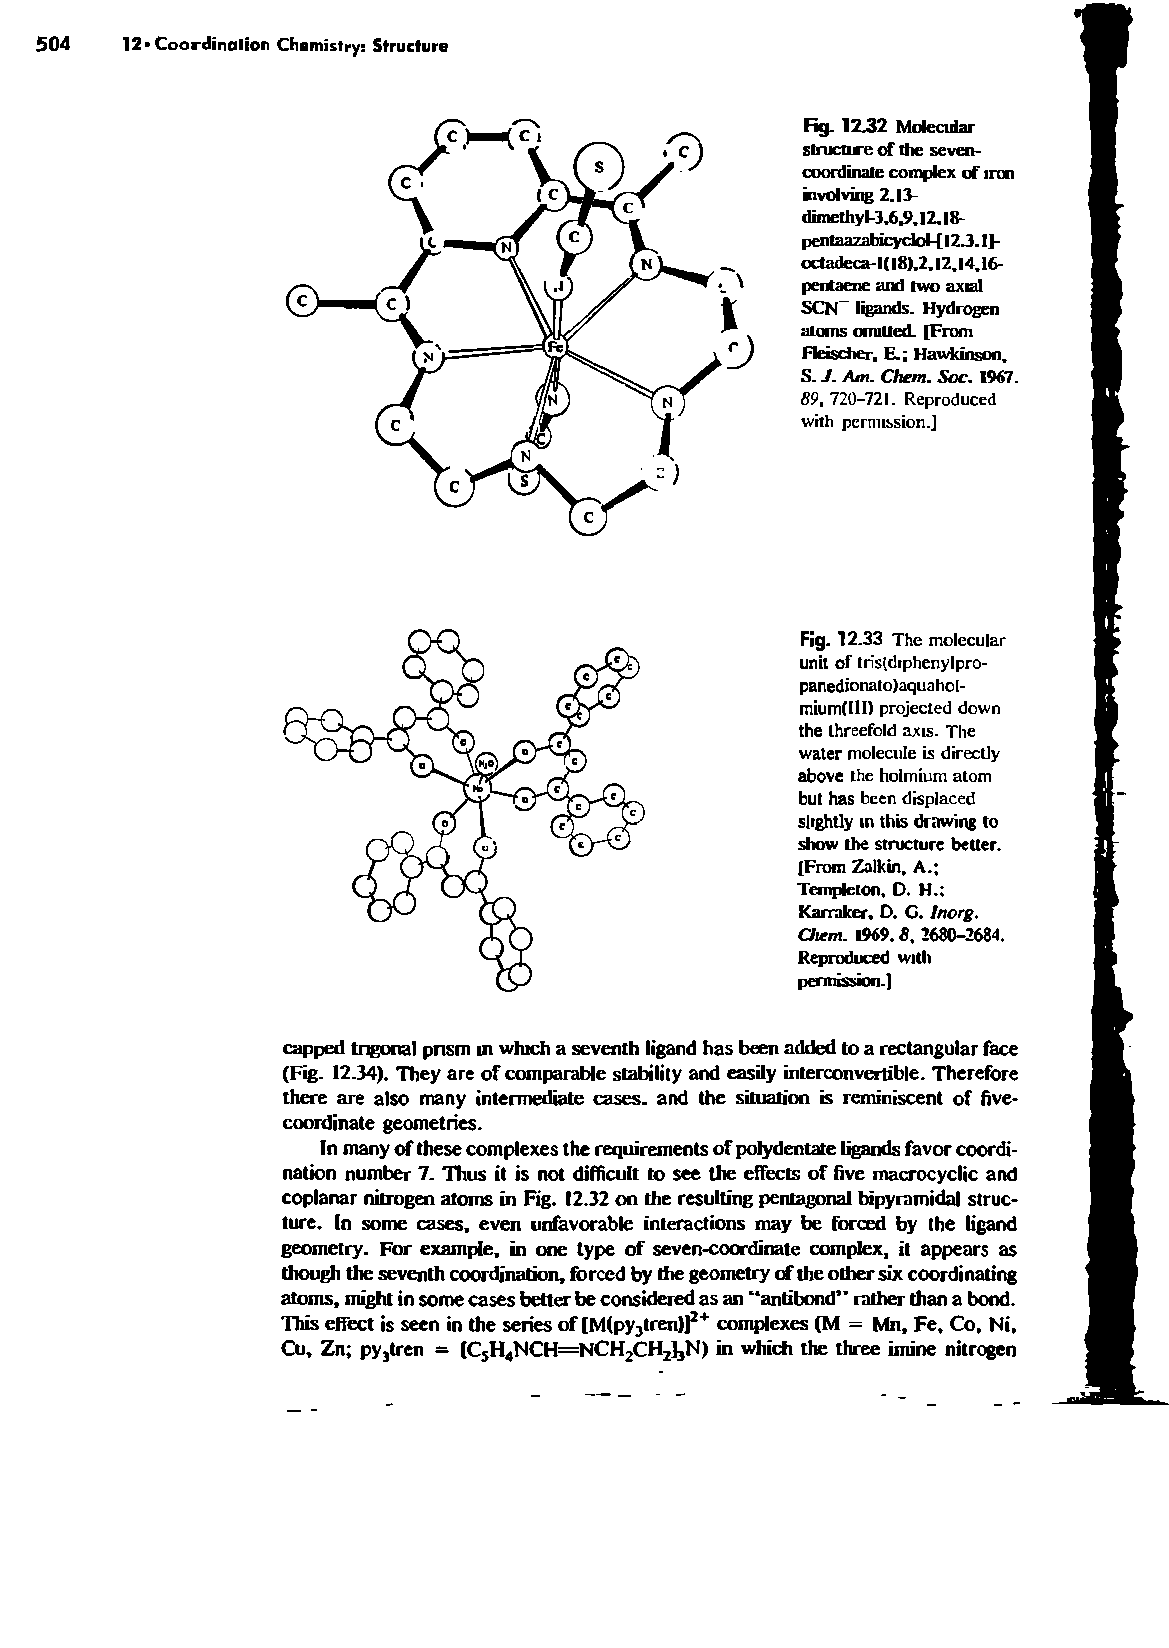 Fig. 12.33 The molecular unit of tn s((lrphenylpro-paredionalo)aquahol-mium(lll) projected down the threefold axis. The water molecule is directly above the holmium atom but has been displaced slightly in this drawing to show the structure better. [From Zalkin, A. Templeton, O. H. Karraker, O. C. Incrg. Chem. 1969.8, 2680-2684. Reproduced with permission-]...